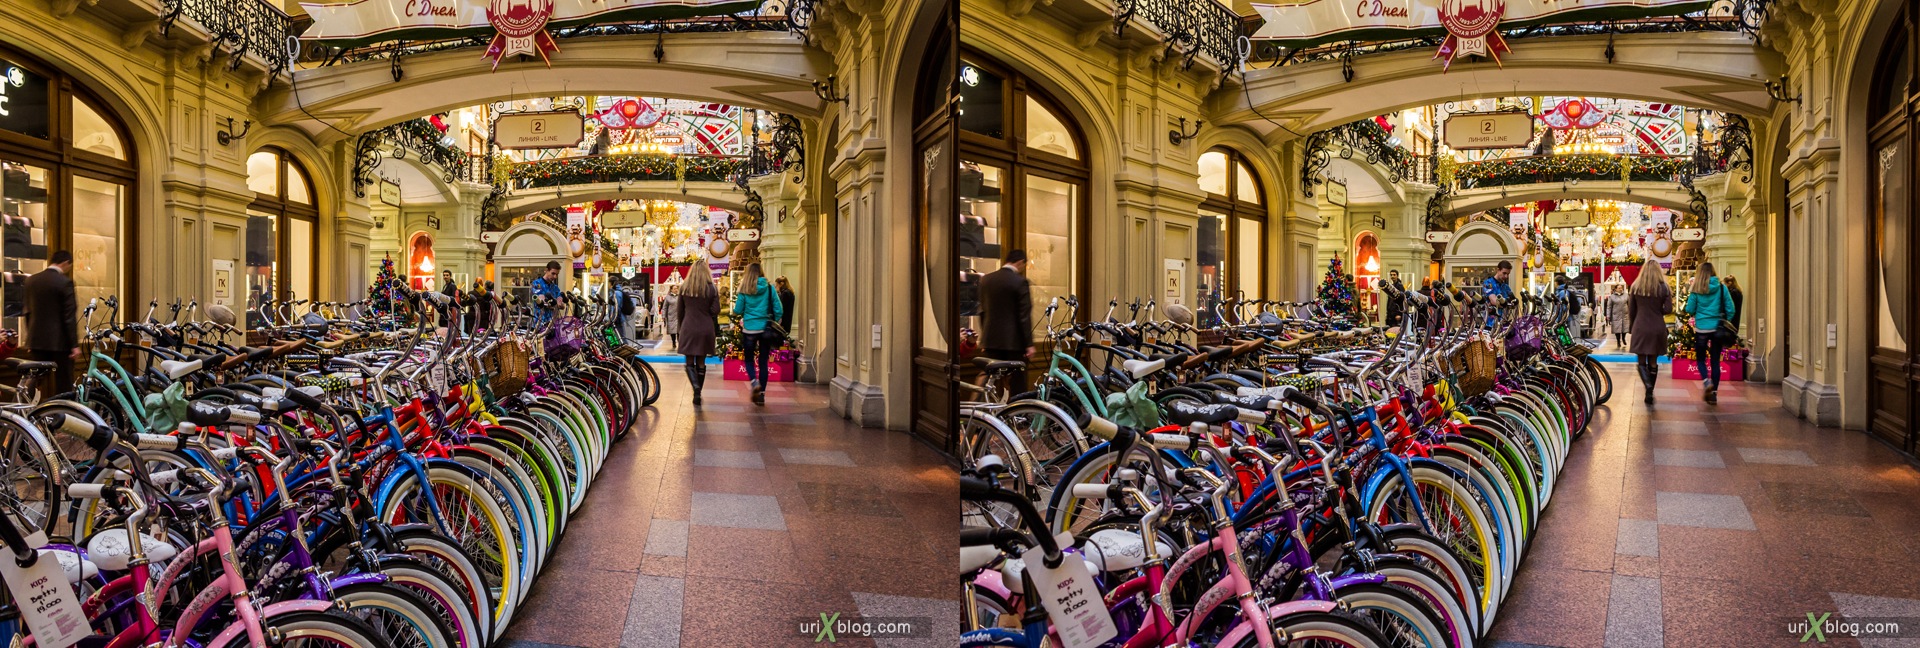 2013, Moscow, Russia, GUM, bicycles, vehicle, exhibition, shop, mall, 3D, stereo pair, cross-eyed, crossview, cross view stereo pair, stereoscopic